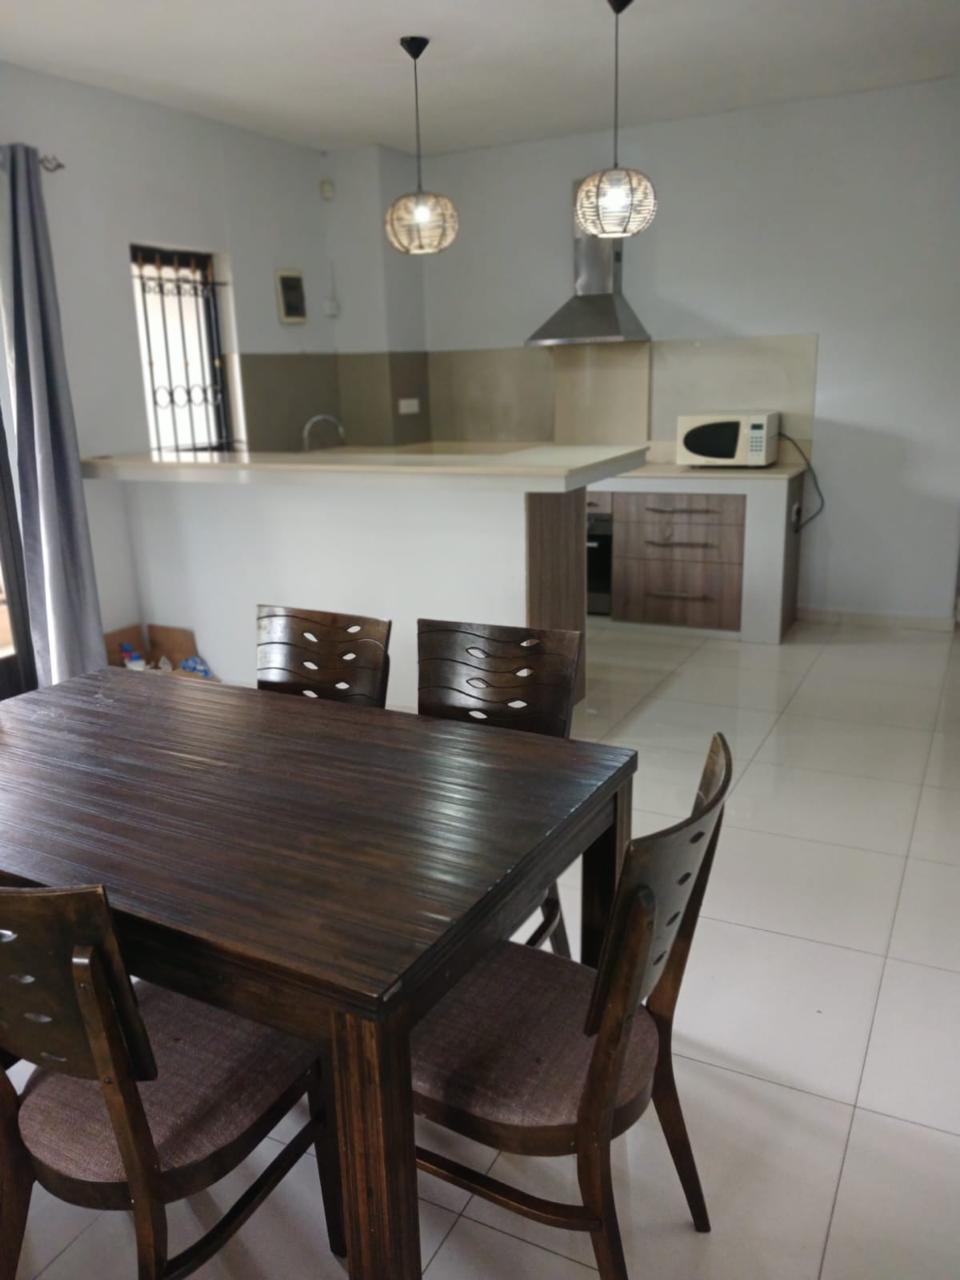 For Rent, Apartment in Pereybere